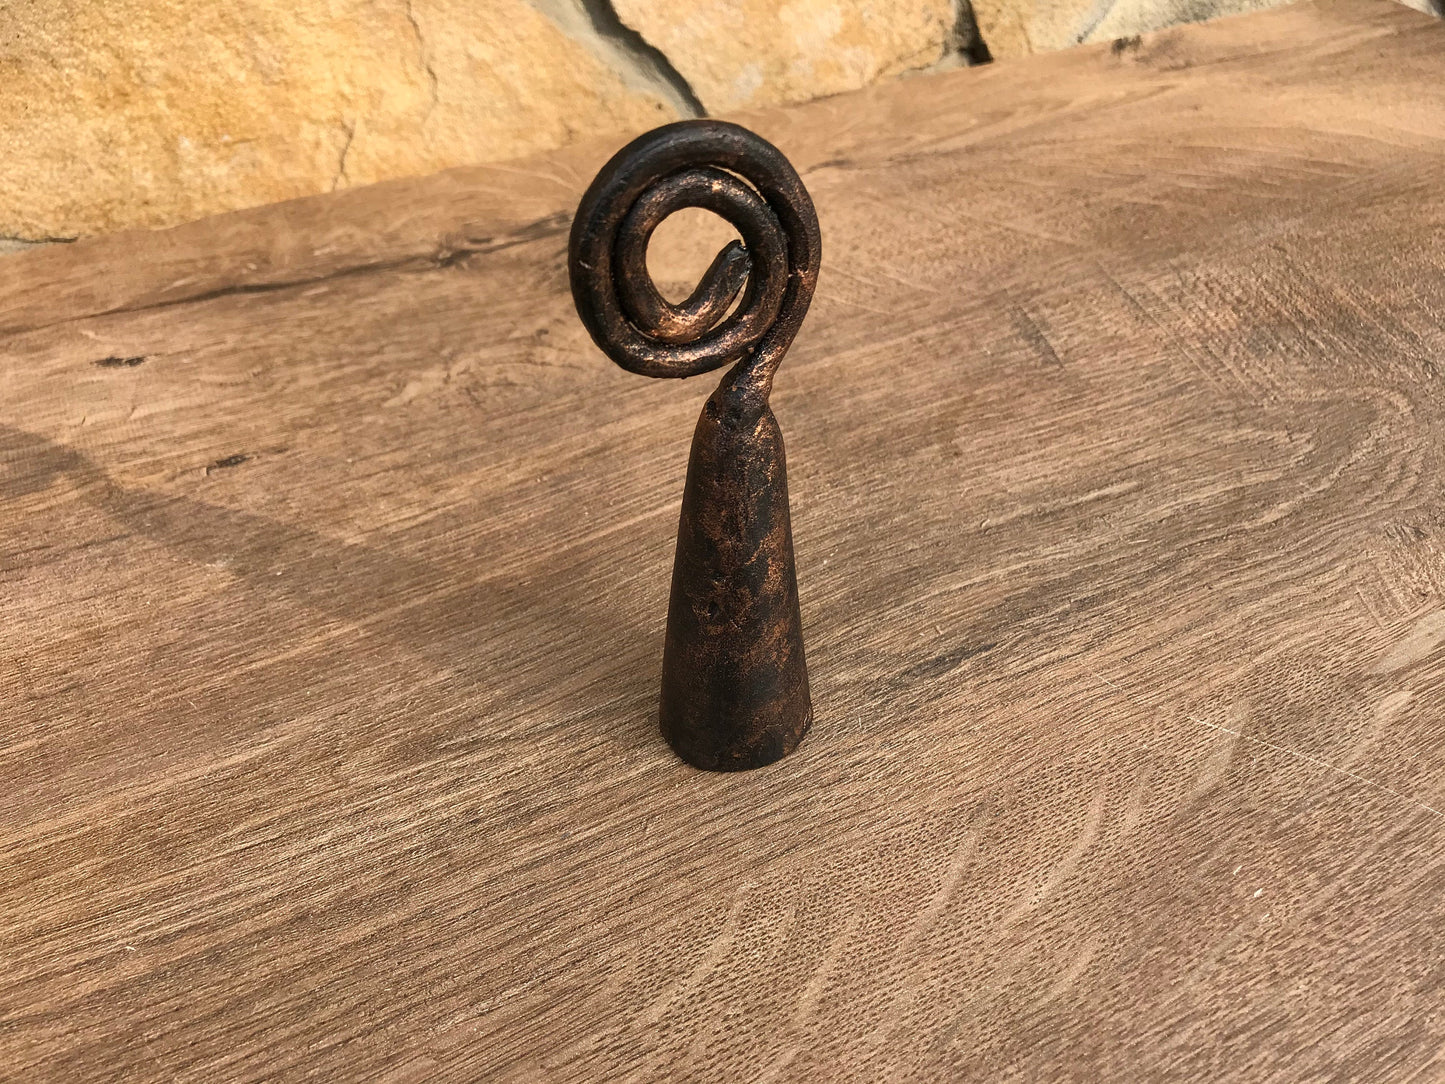 Candle snuffer, candle holder, candle decor, candle accessory, iron gift, 6th anniversary, iron anniversary, Christmas gift,birthday gift